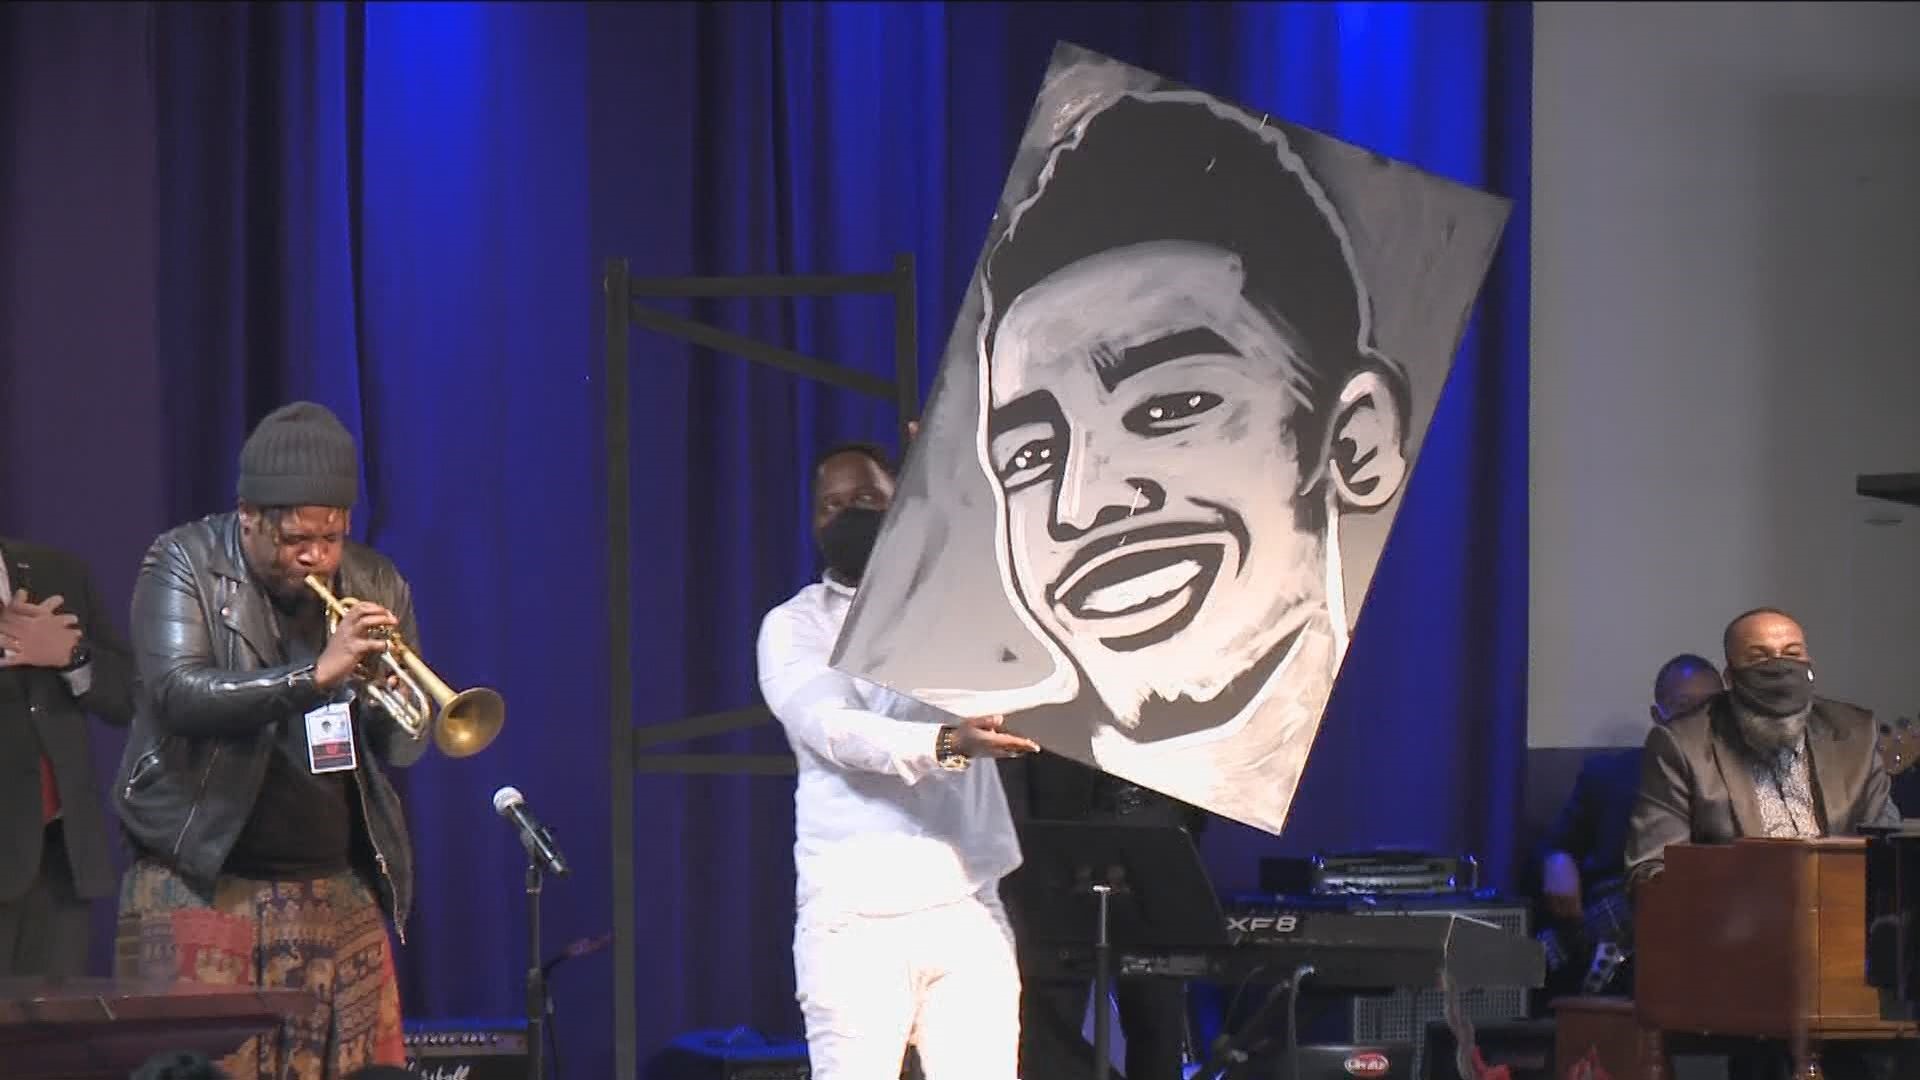 At Thursday's memorial service for Daunte Wright, trumpeter Keyon Harrold played as artist Ange Hillz painted a portrait of Wright on a canvas displayed on stage.